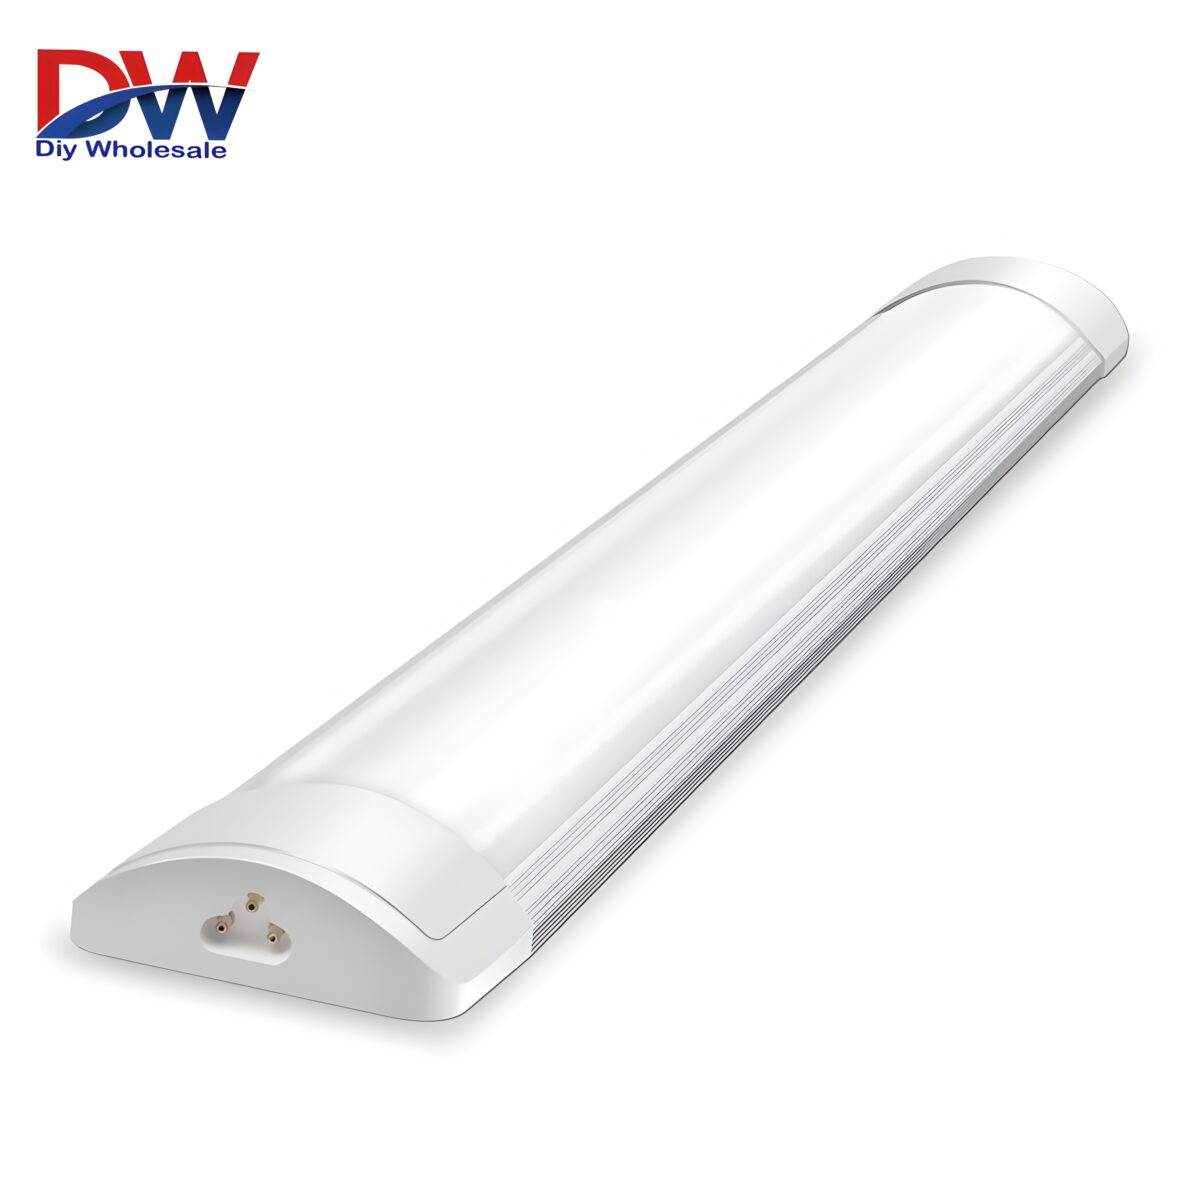 2ft batten light, 2ft led batten light, led batten light 2ft, led batten lights 2ft, batten light installation, how to wire led batten lights, wiring led batten lights in parallel, what is led batten light, lighting batten lights, how to install batten light, how to install led batten lights on ceiling, how to install led batten light, how do you connect led batten lights, batten lights, how to wire a batten light, best led batten lights